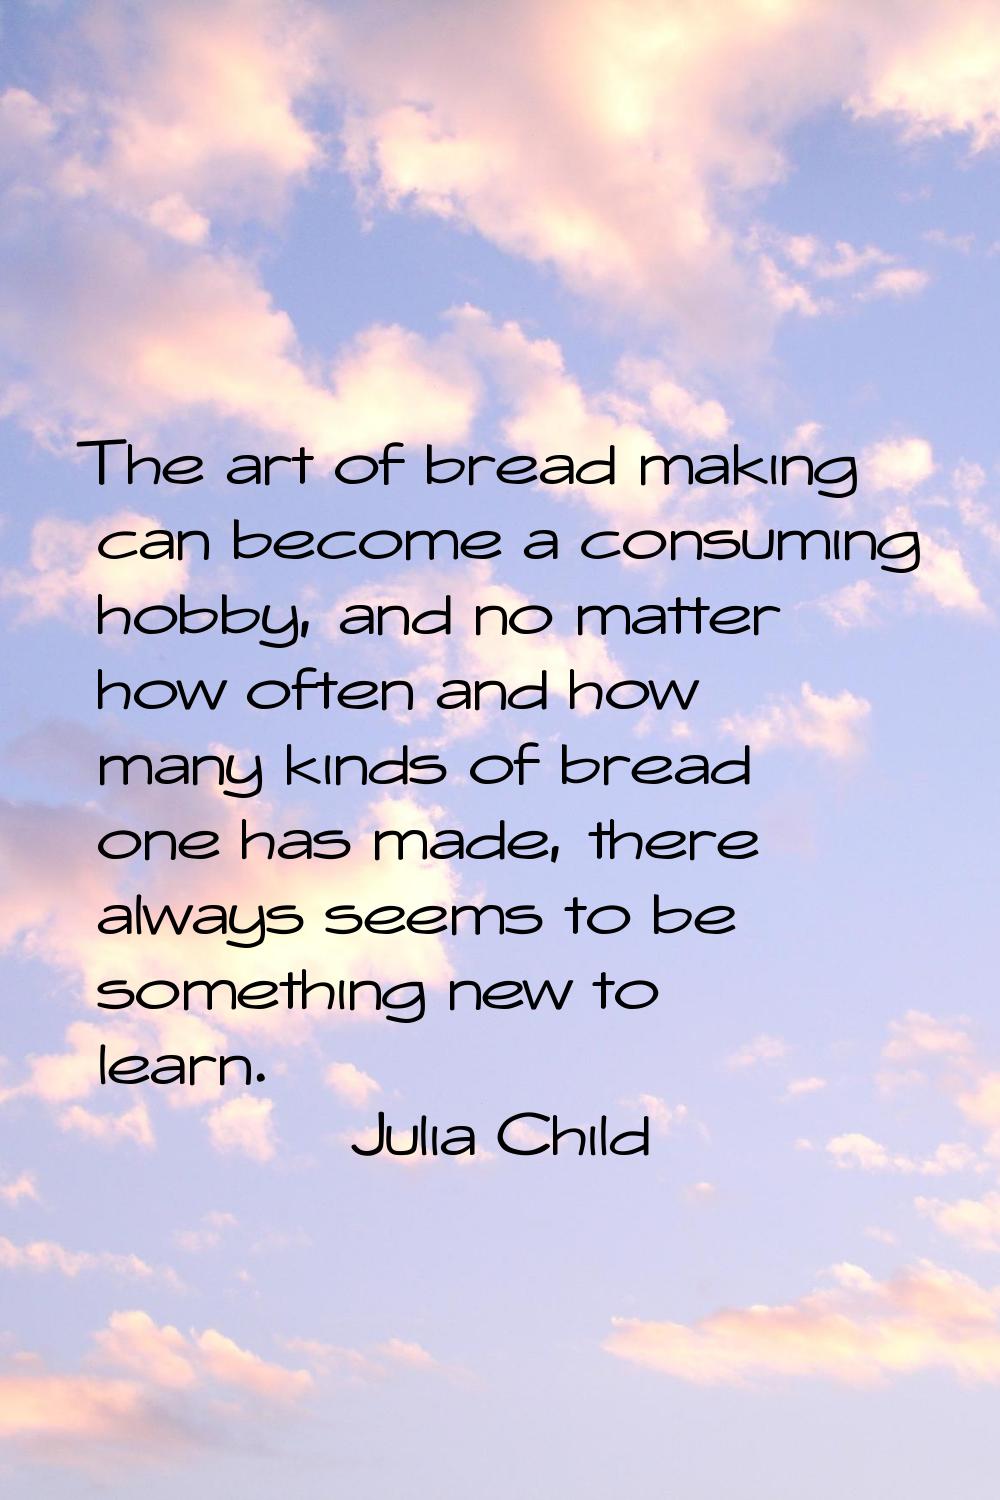 The art of bread making can become a consuming hobby, and no matter how often and how many kinds of